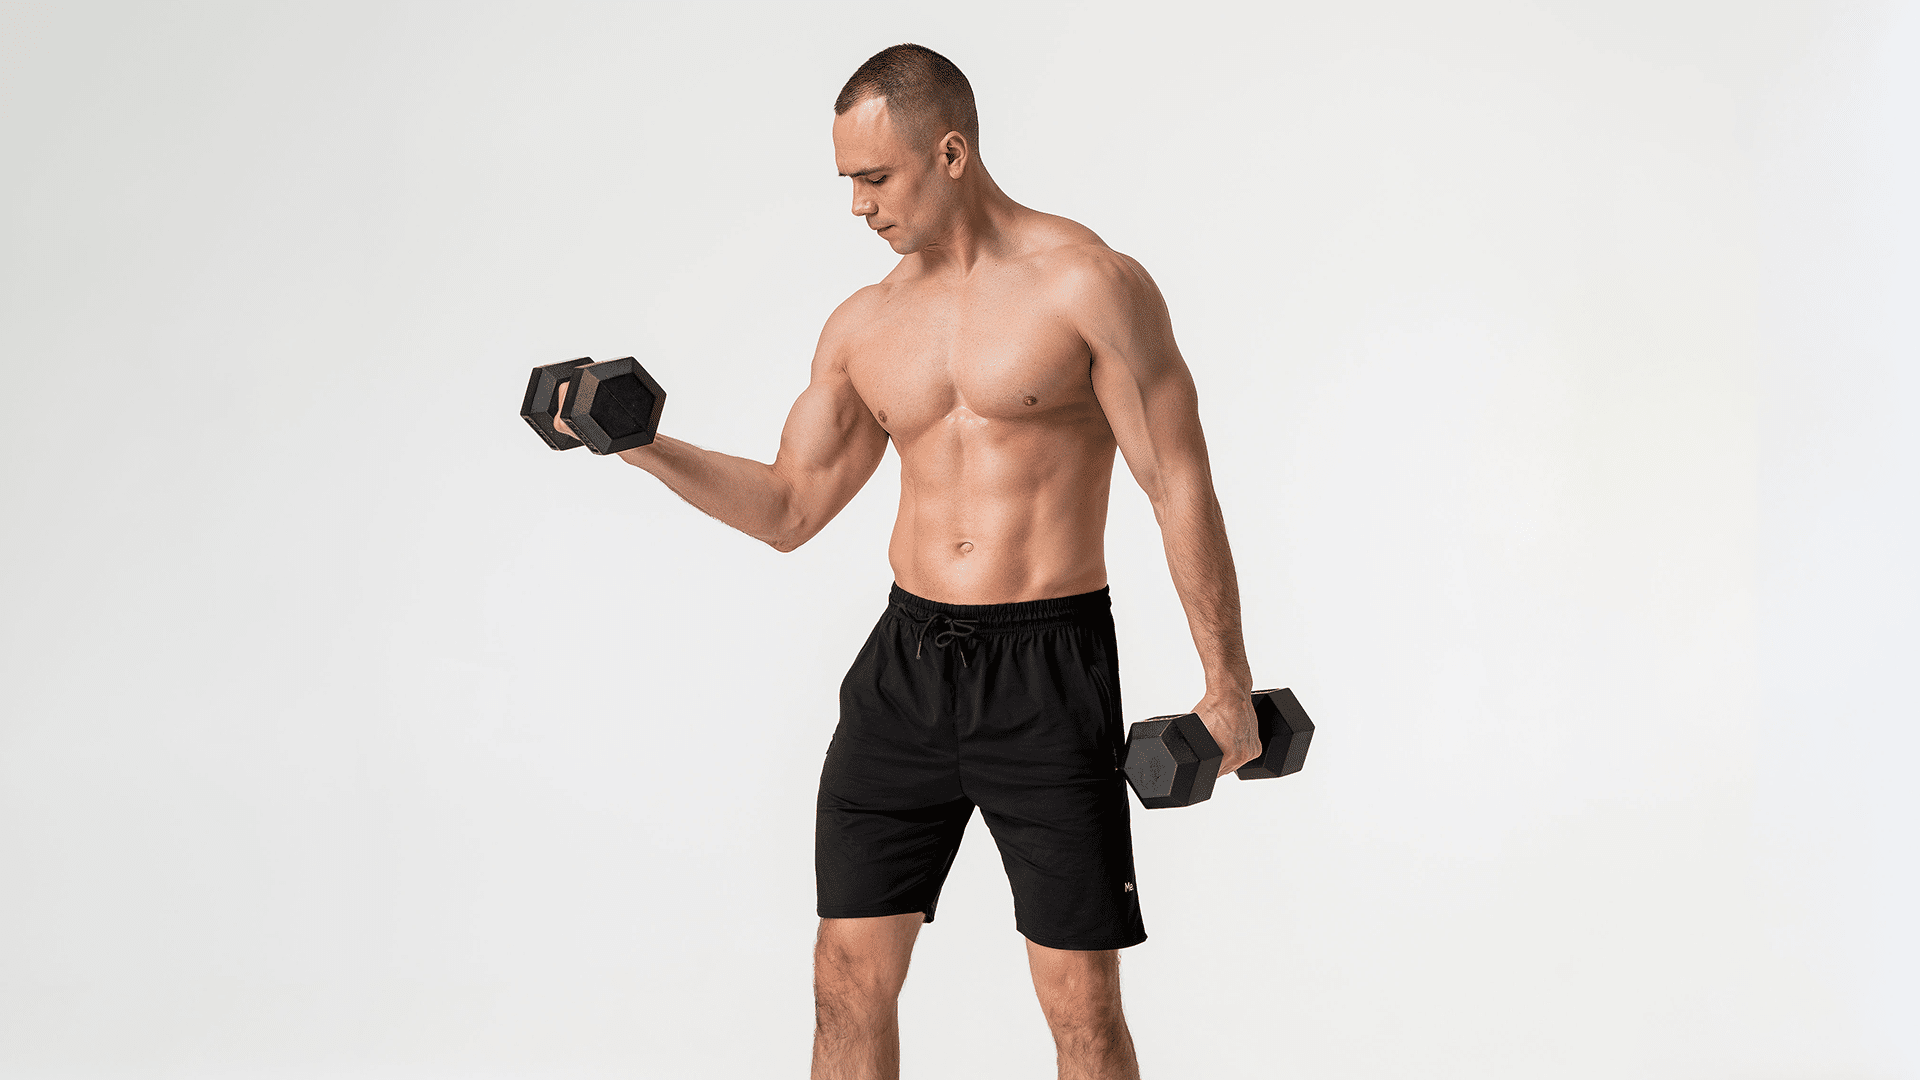 Maximize Your Calisthenics Workout with Weighted Dumbbell Exercises